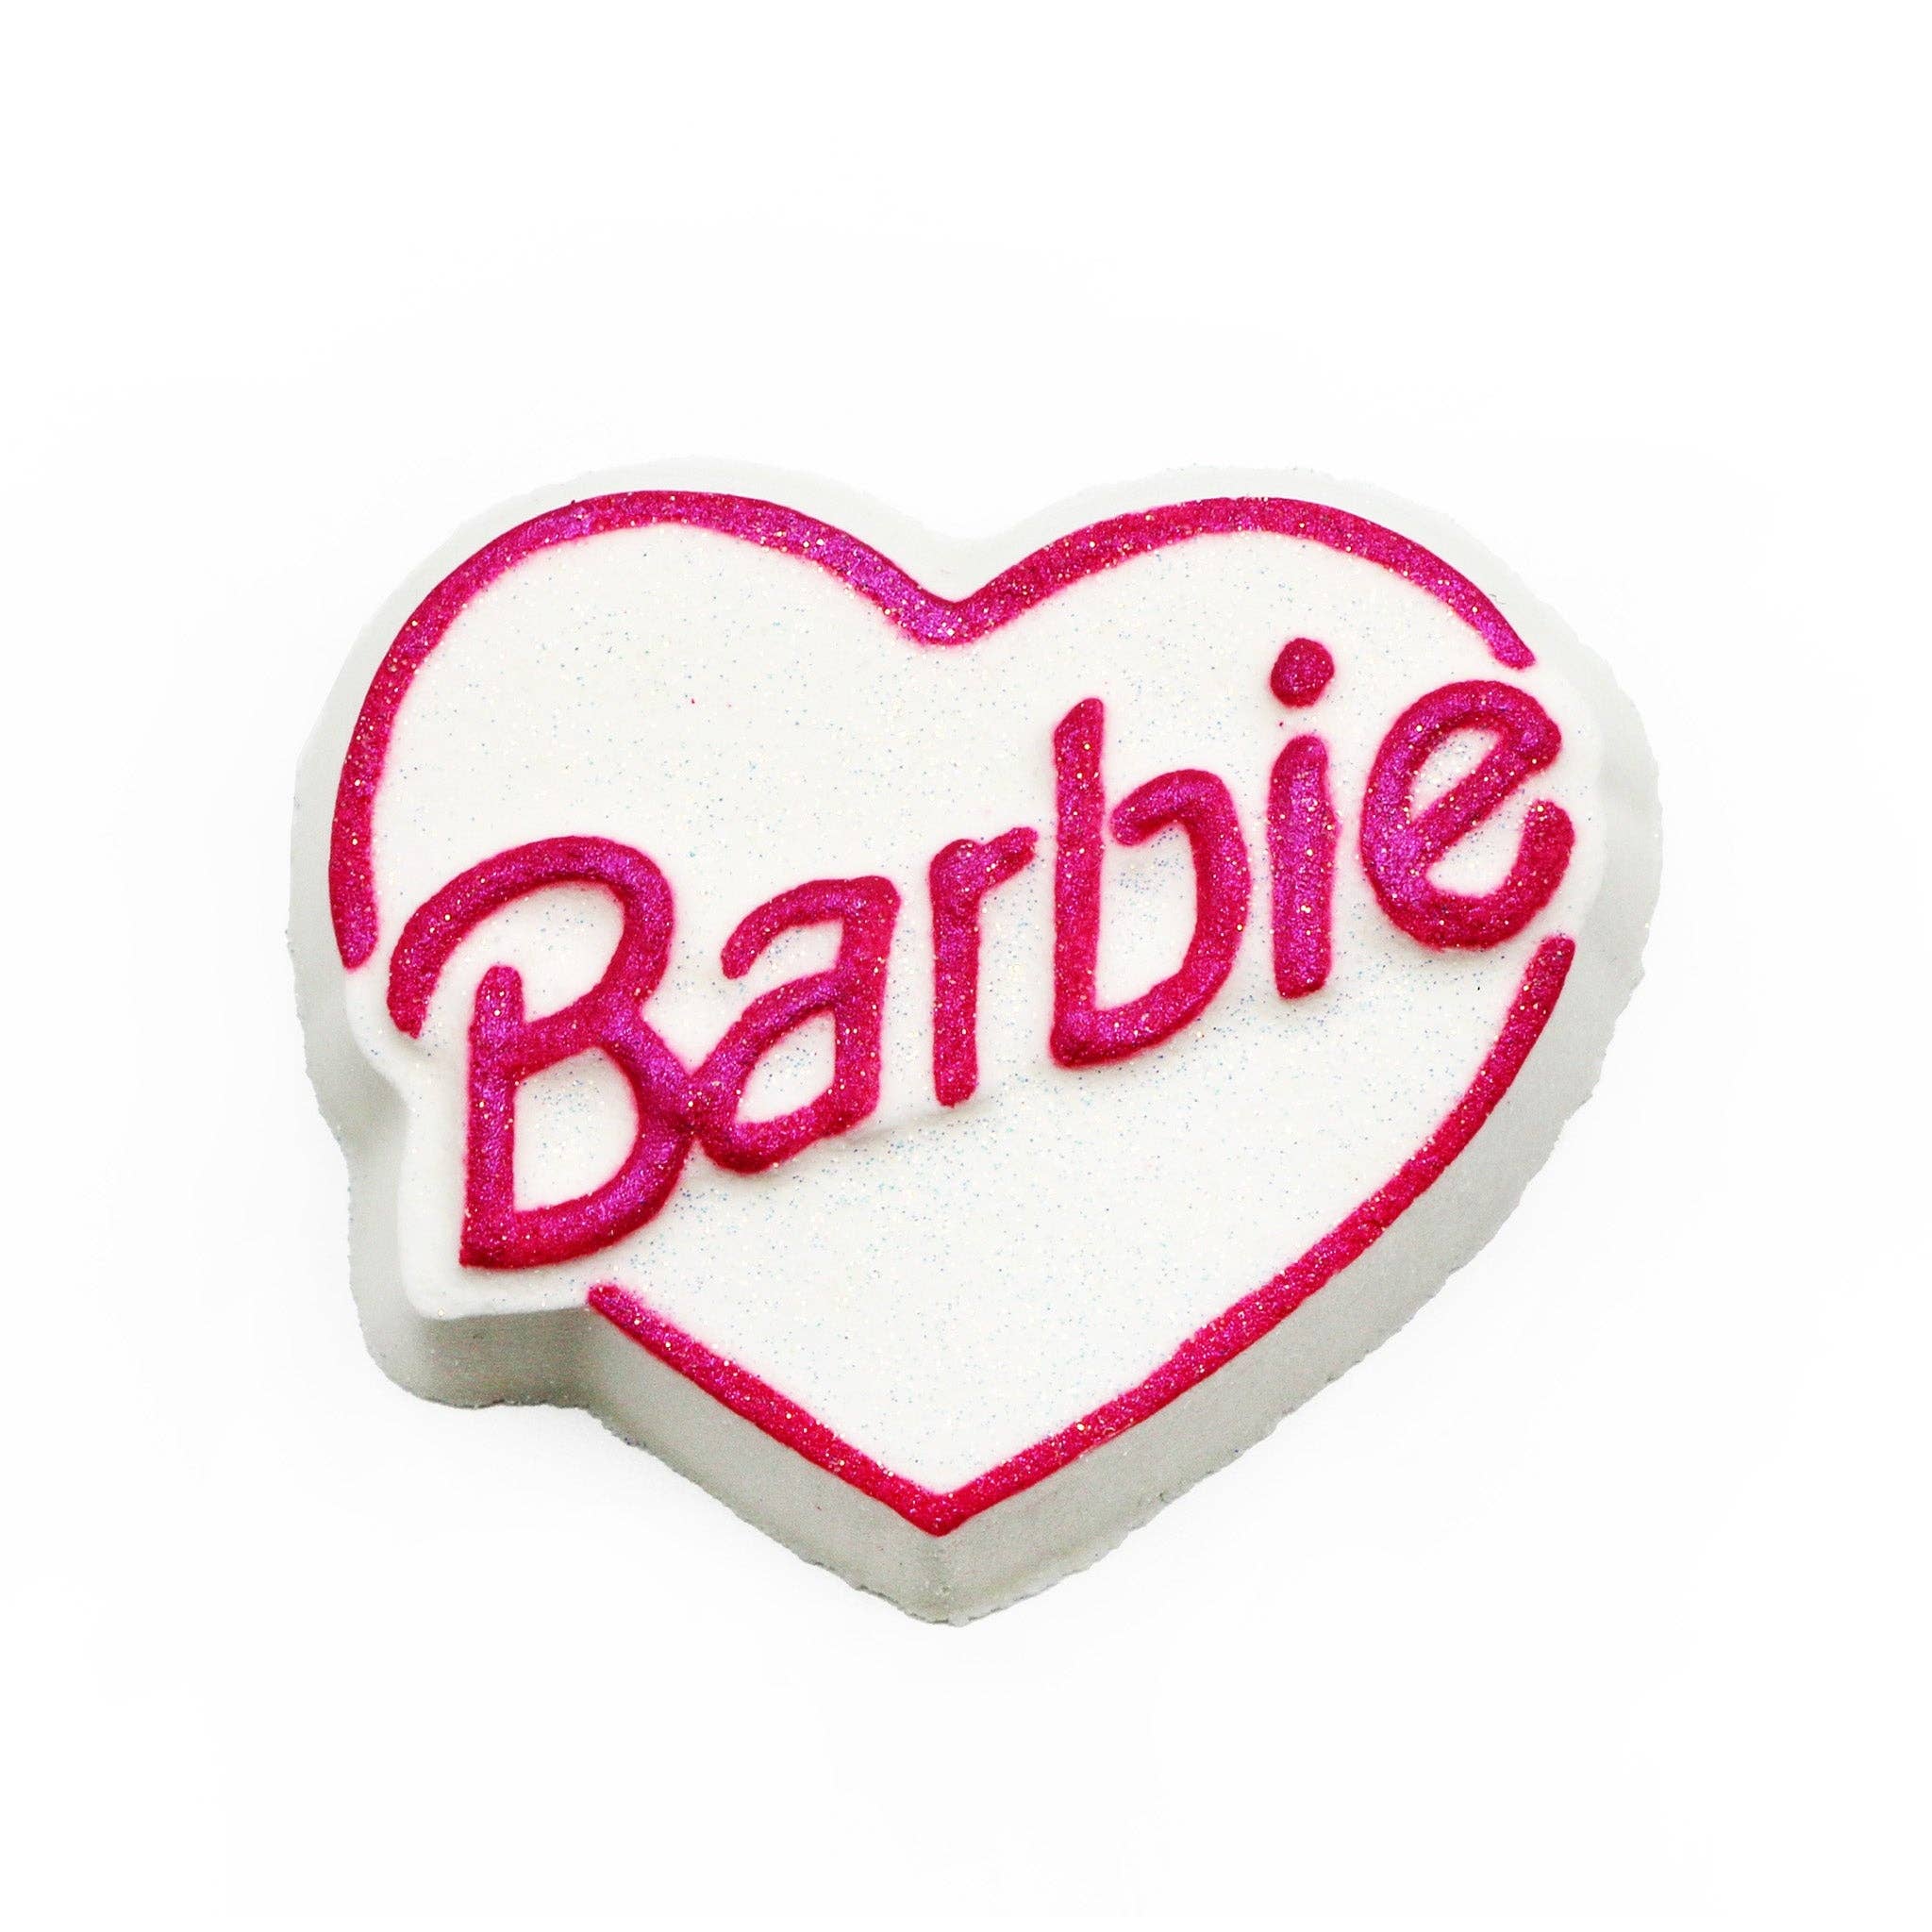 Barbie blow kisses Straw/pencil or pen charms